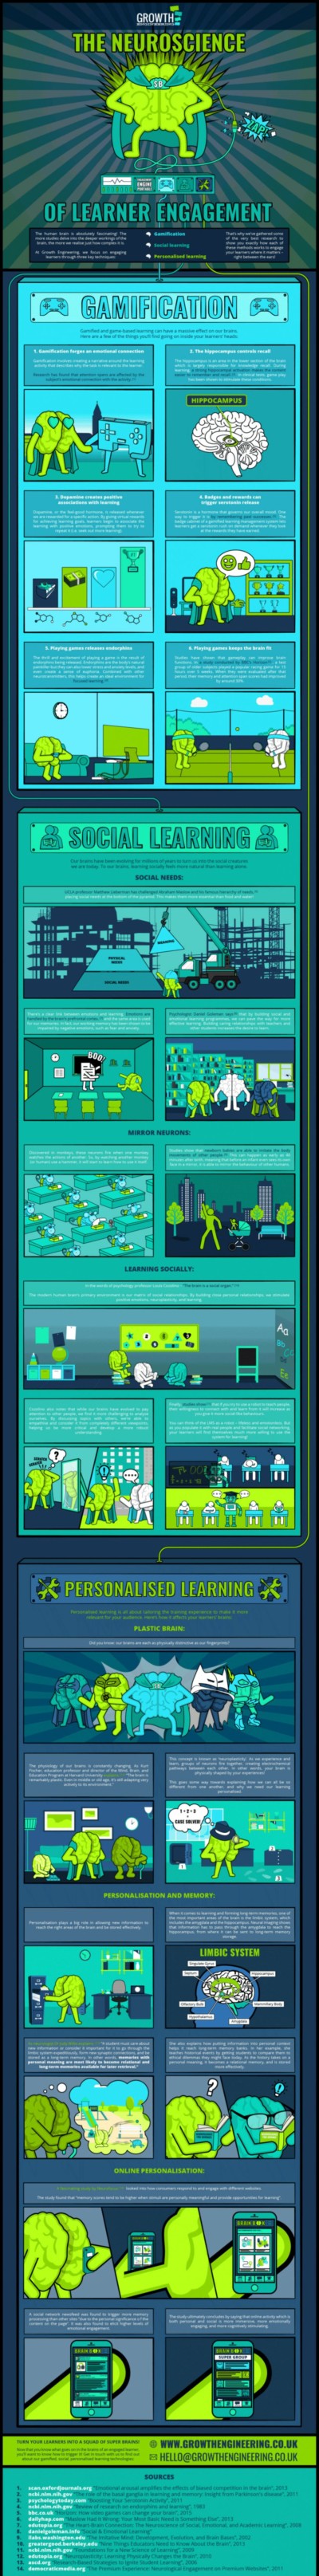 the-neuroscience-of-learner-engagement-infographic-e-learning-infographics